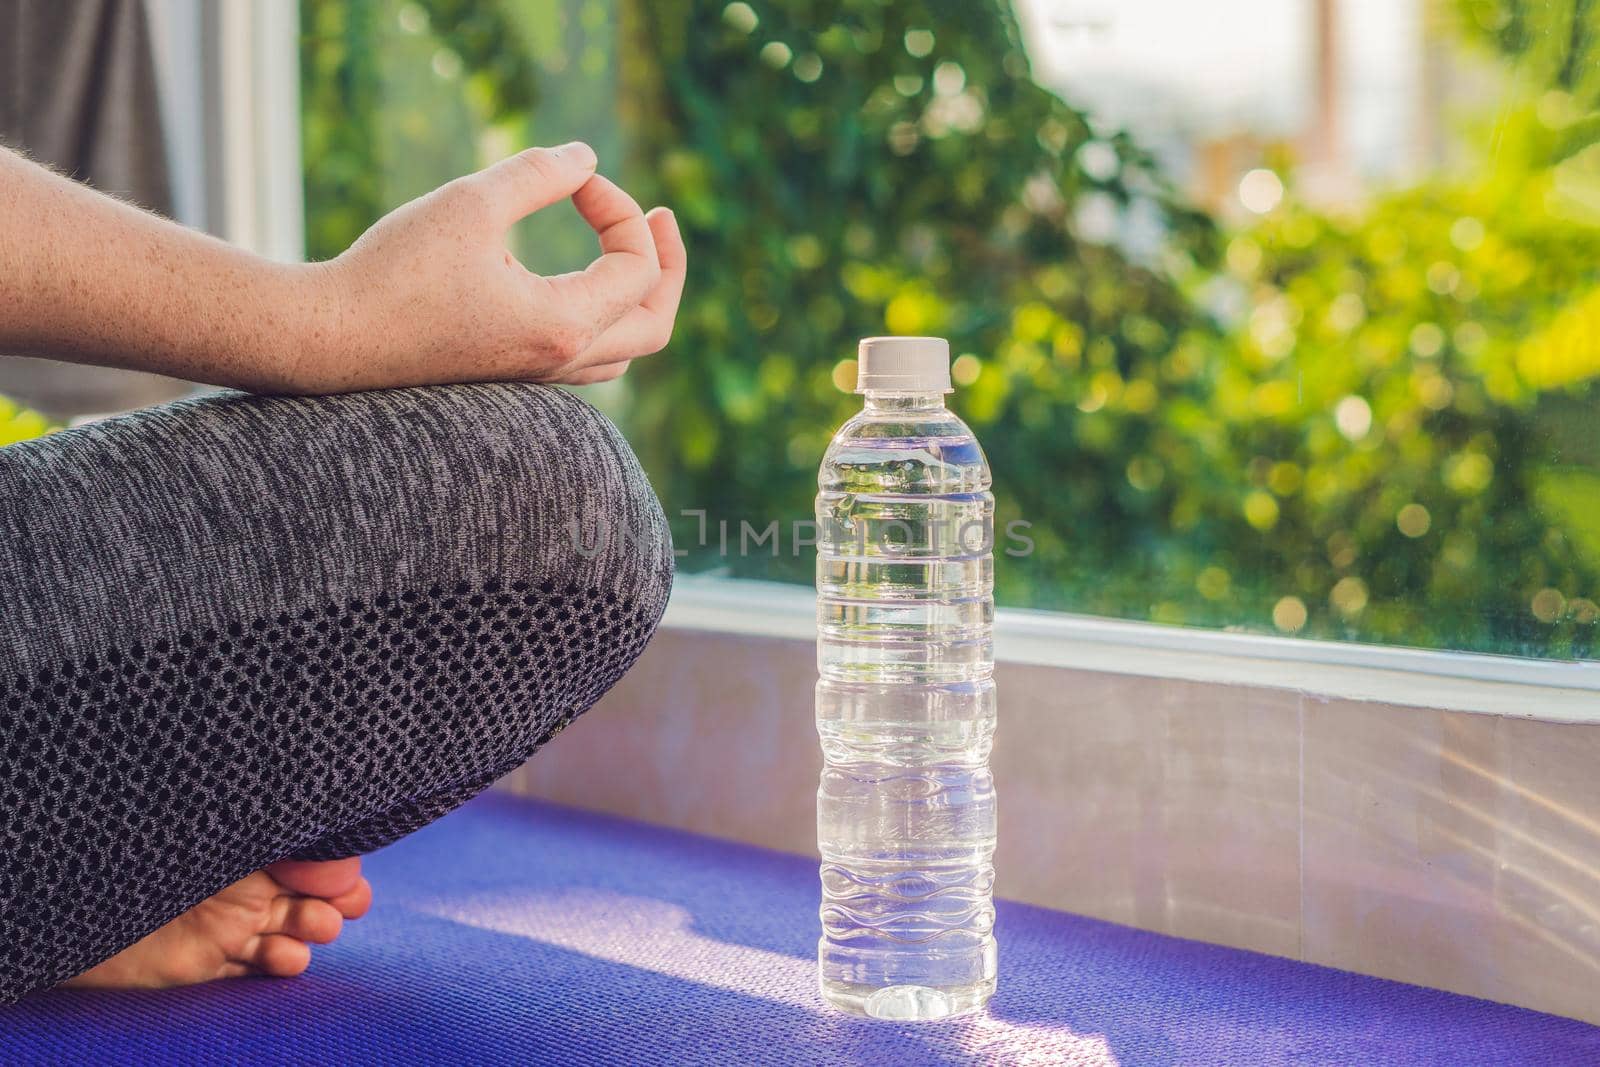 hand of a woman meditating in a yoga pose on a rug for yoga and a bottle of water.